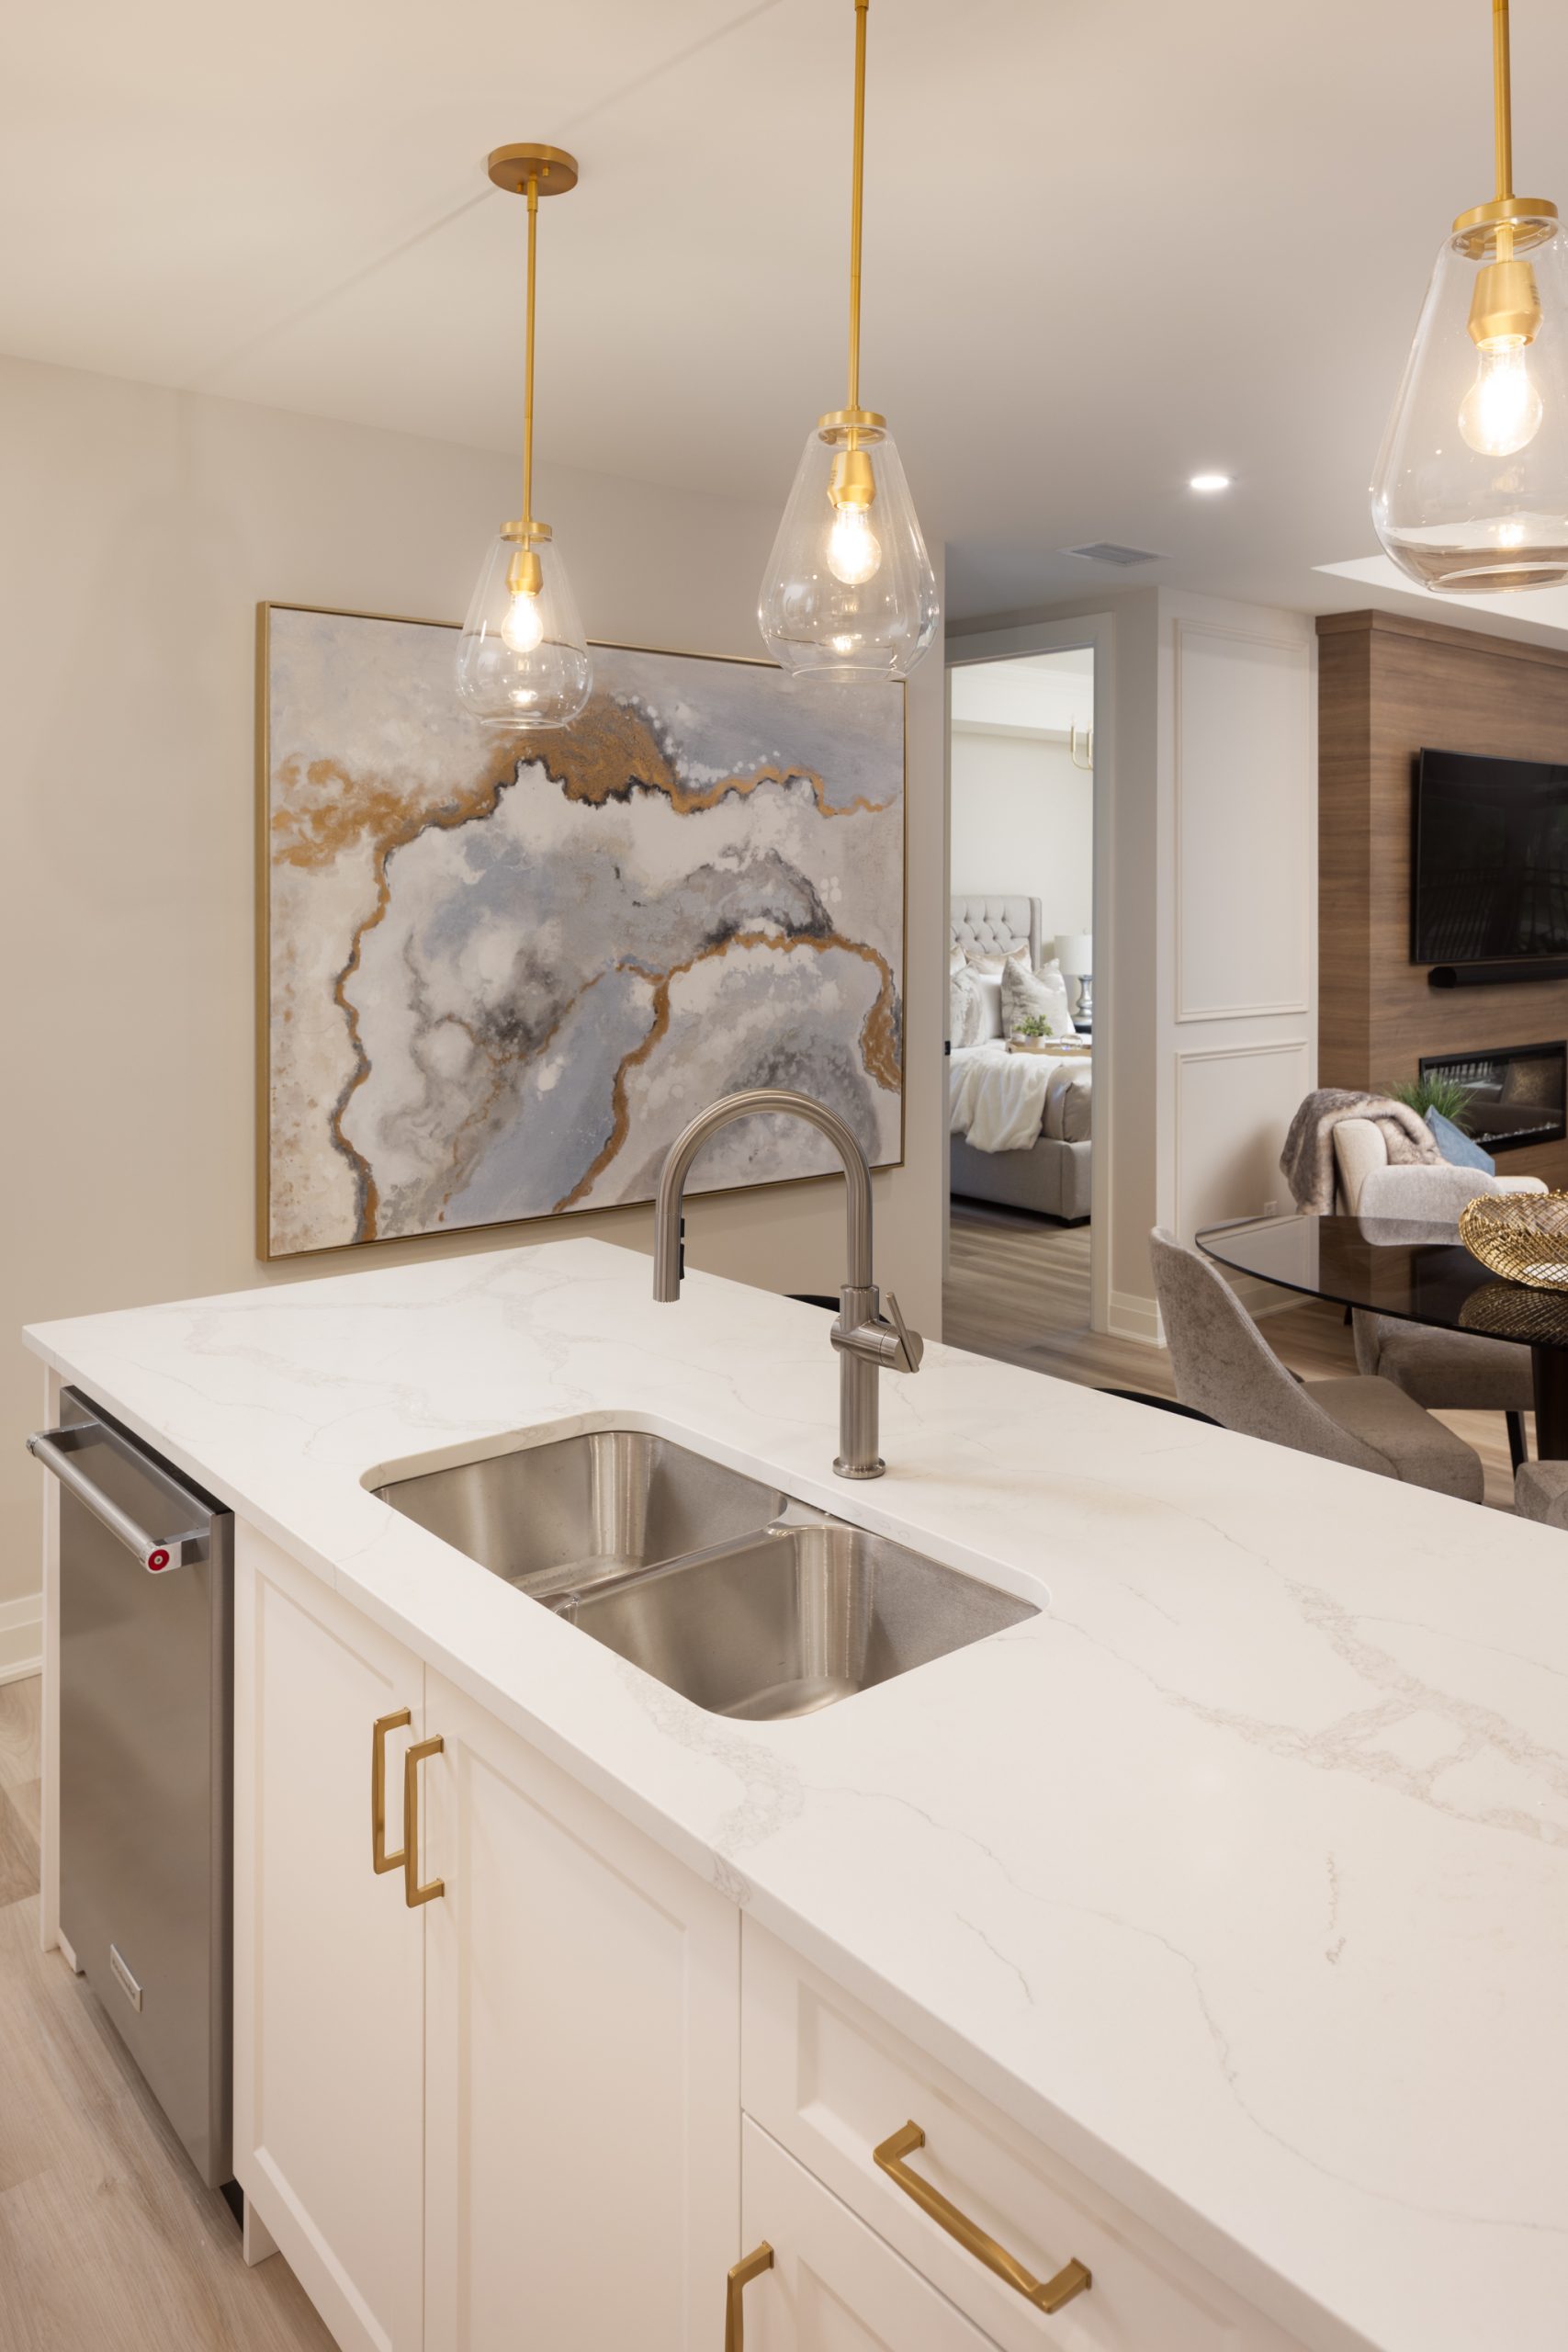 View over the kitchen island into the master bedroom. Kitchen features cream cabinets, white marbled granite counters and gold fixtures.